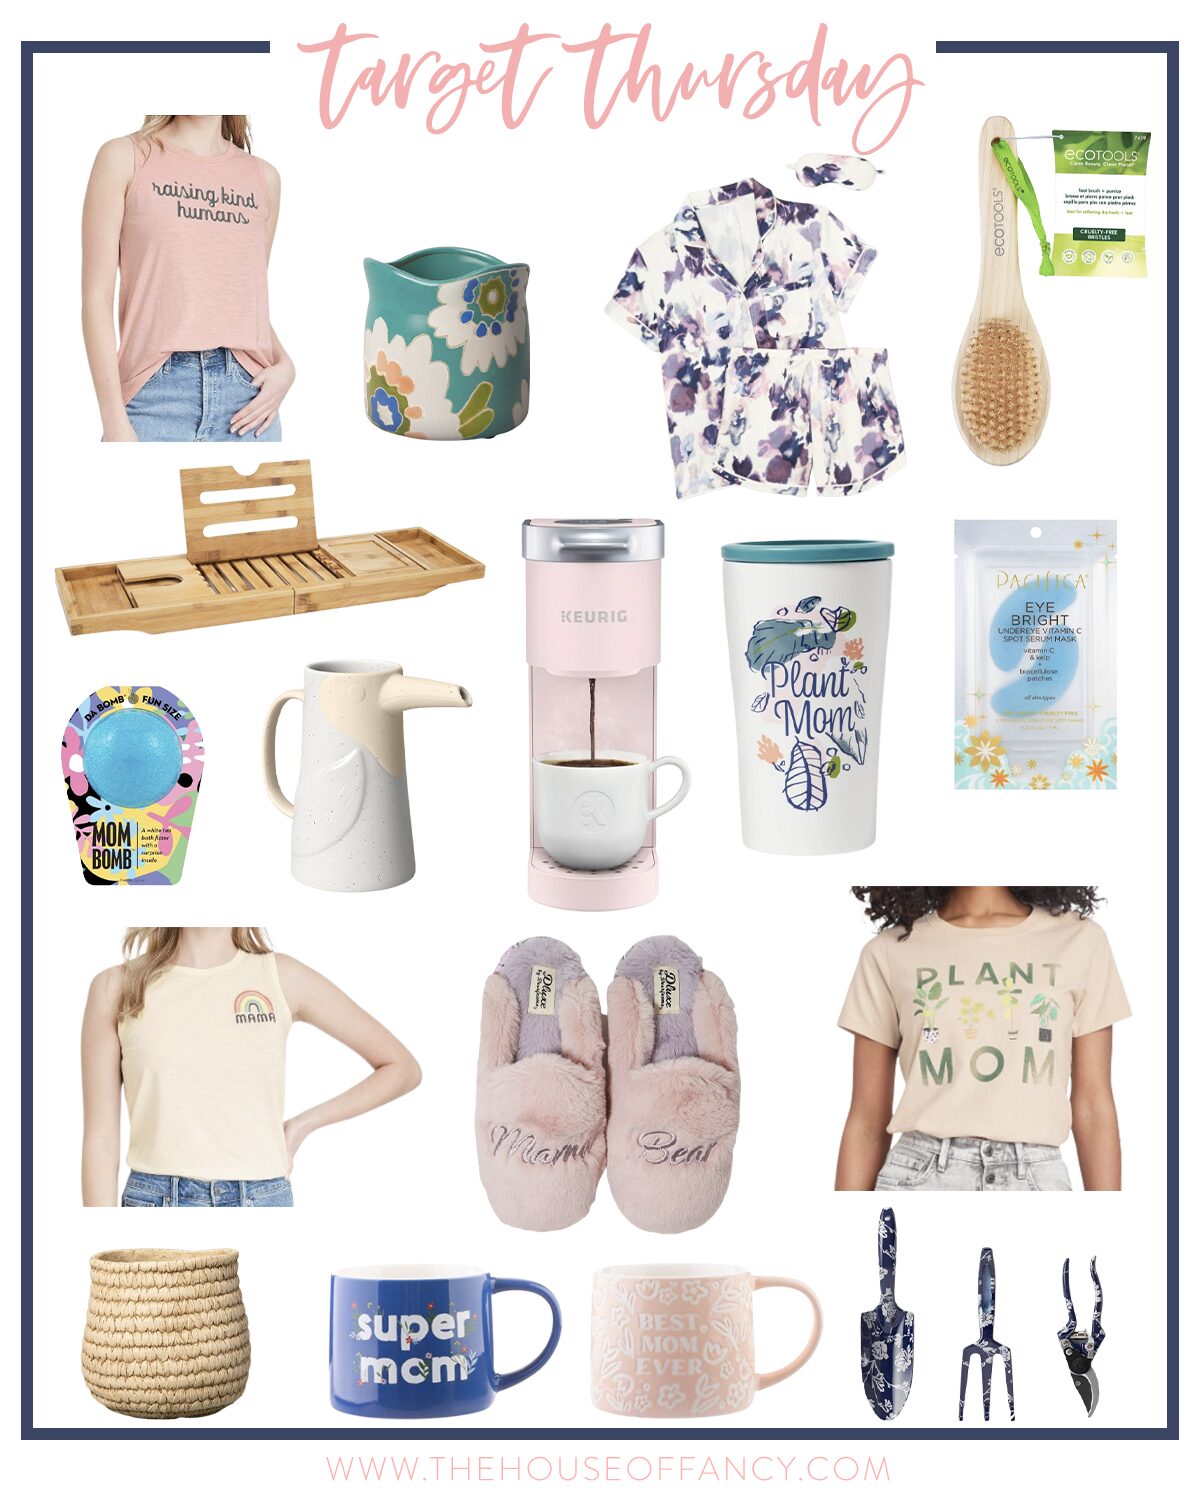 Target Thursday by popular Houston life and style blog, The House of Fancy: collage image of a floral pajama set, floral vase, bird vase, pink Keurig, body brush, eye mask, rainbow tank, plant mom shirt, floral print garden tools, super mom mug, woven basket, mama bear fuzzy slippers, mom bath bomb, Plant mom thermos, and wooden bath tray. 